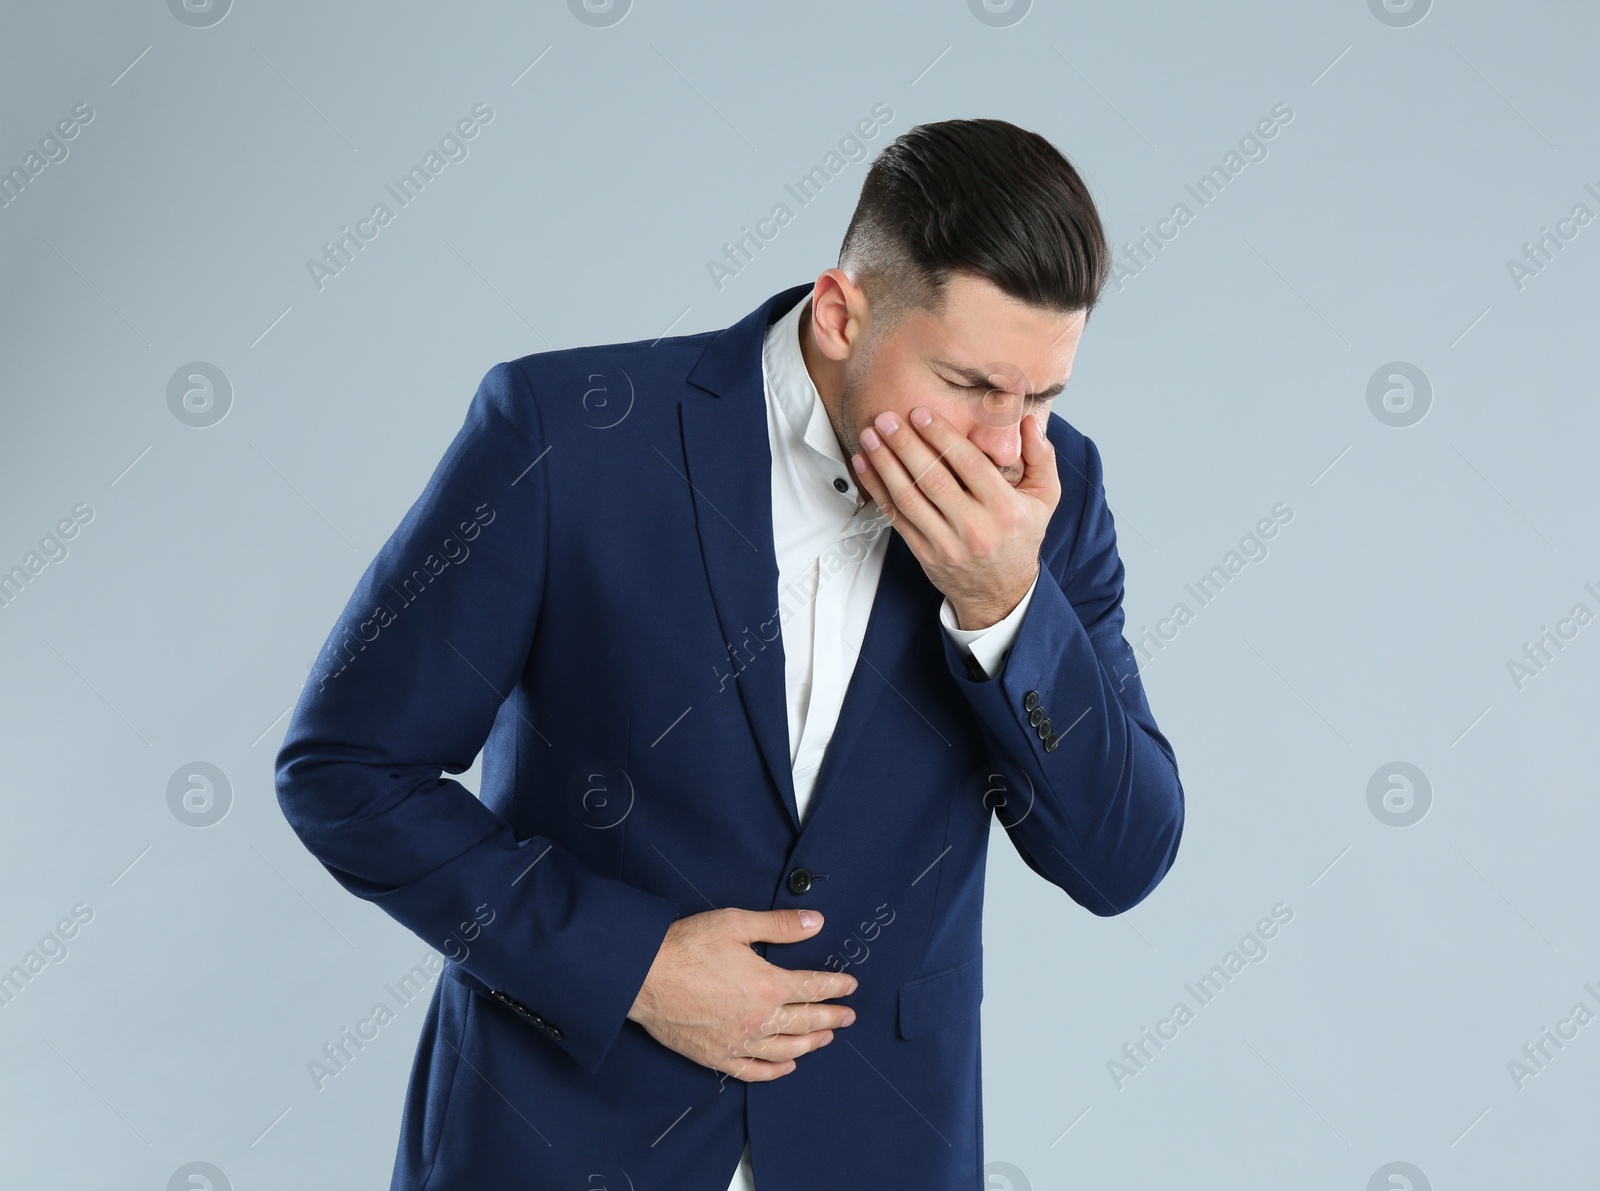 Photo of Man in office suit suffering from stomach ache and nausea on grey background. Food poisoning